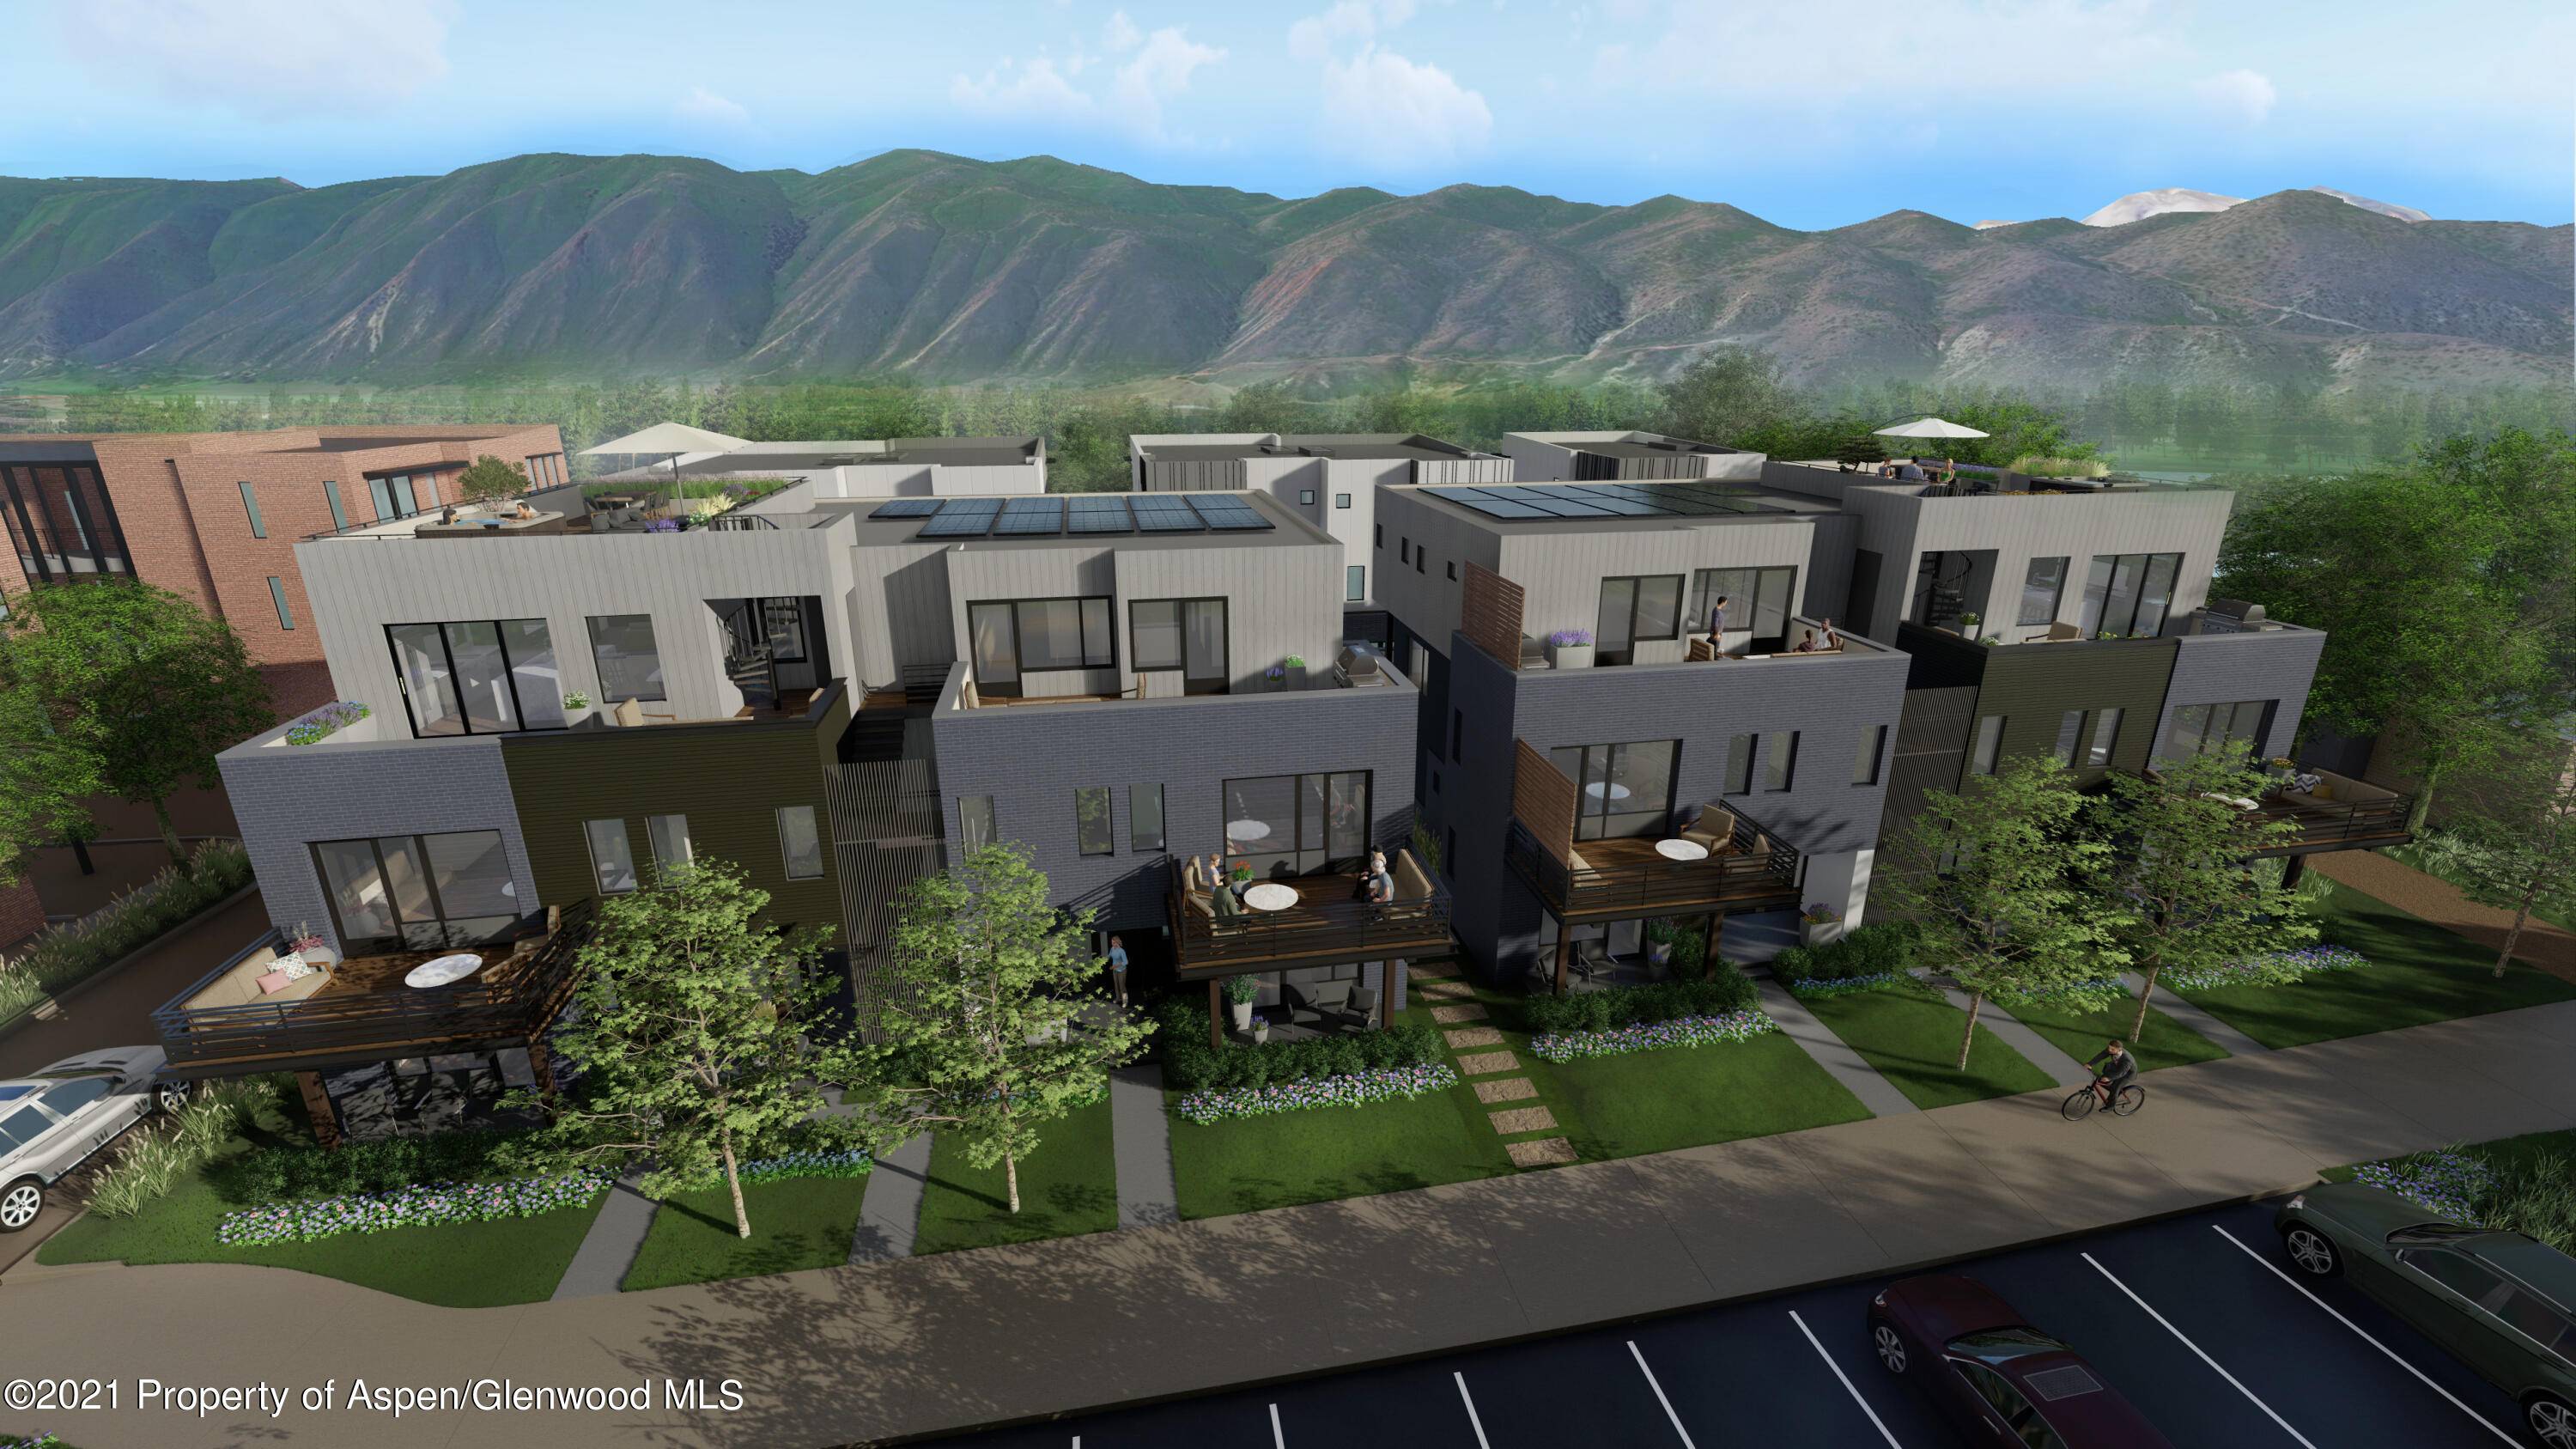 Introducing Park Place Phase II a collection of three residences within the Basalt River Park neighborhood along the Roaring Fork River.